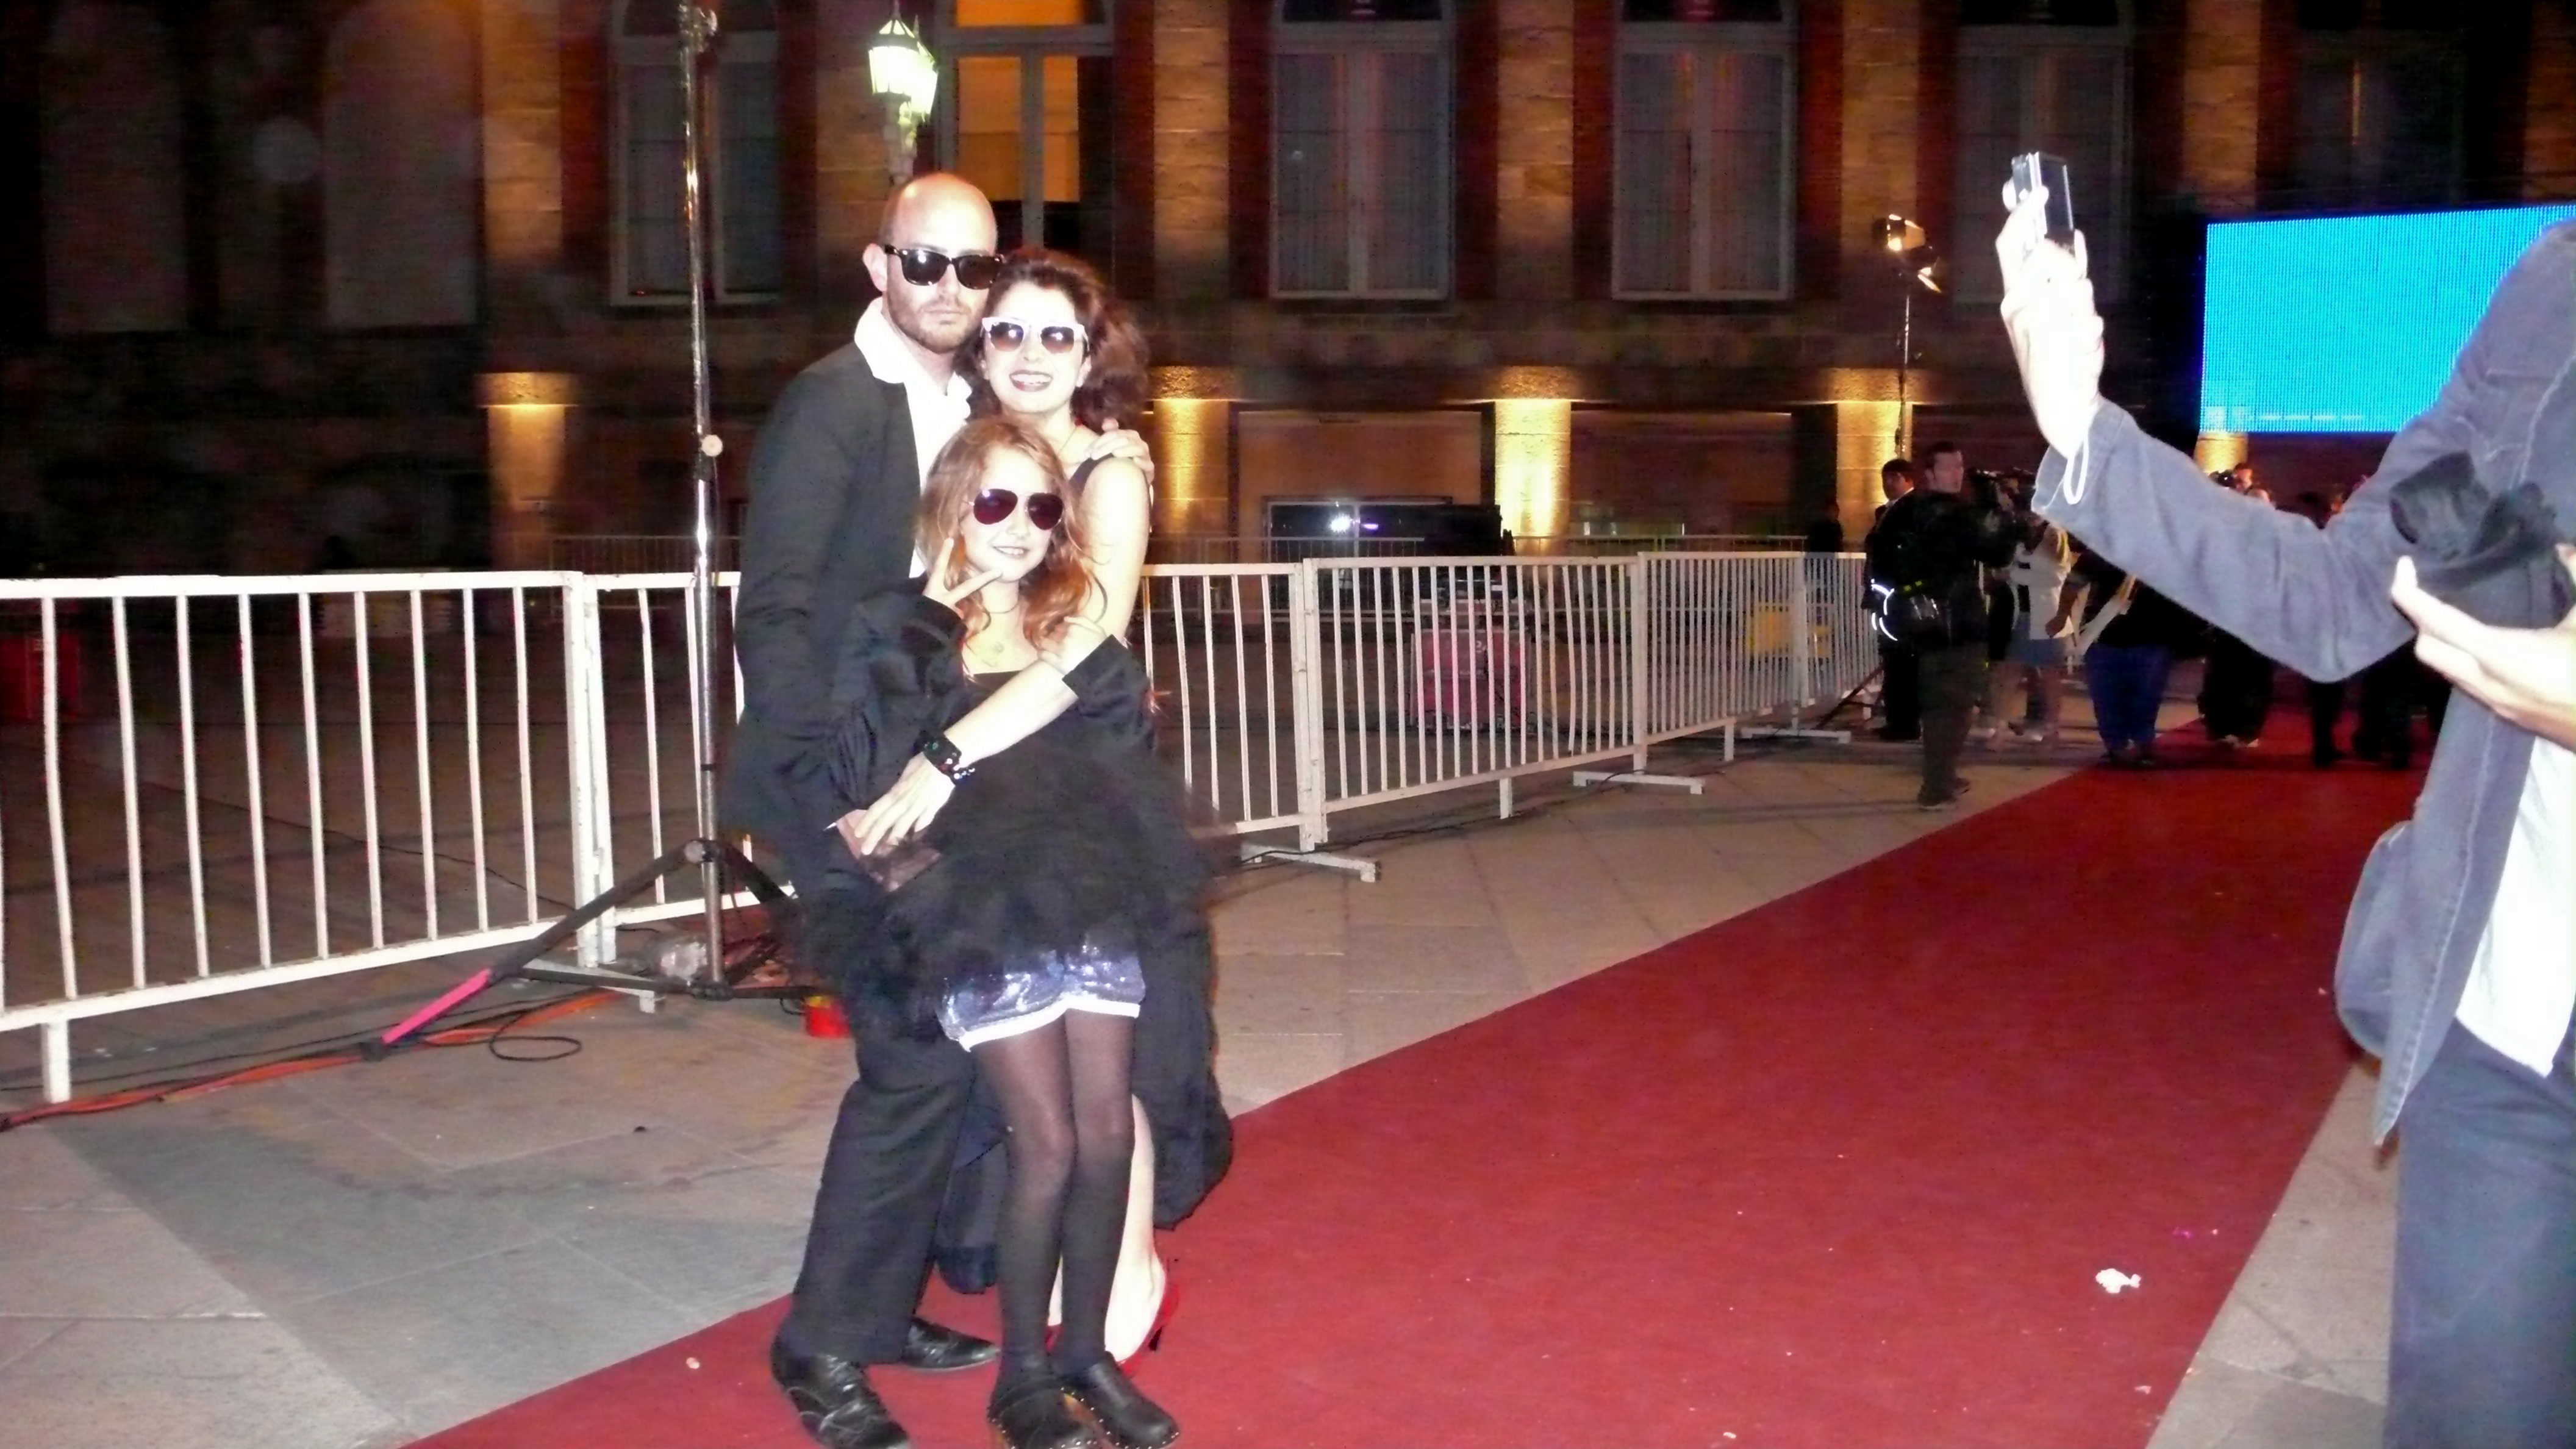 Mar del Plata Film Festival Red carpet after winning Erica Rivas for Before Opening Night Best Actress Award